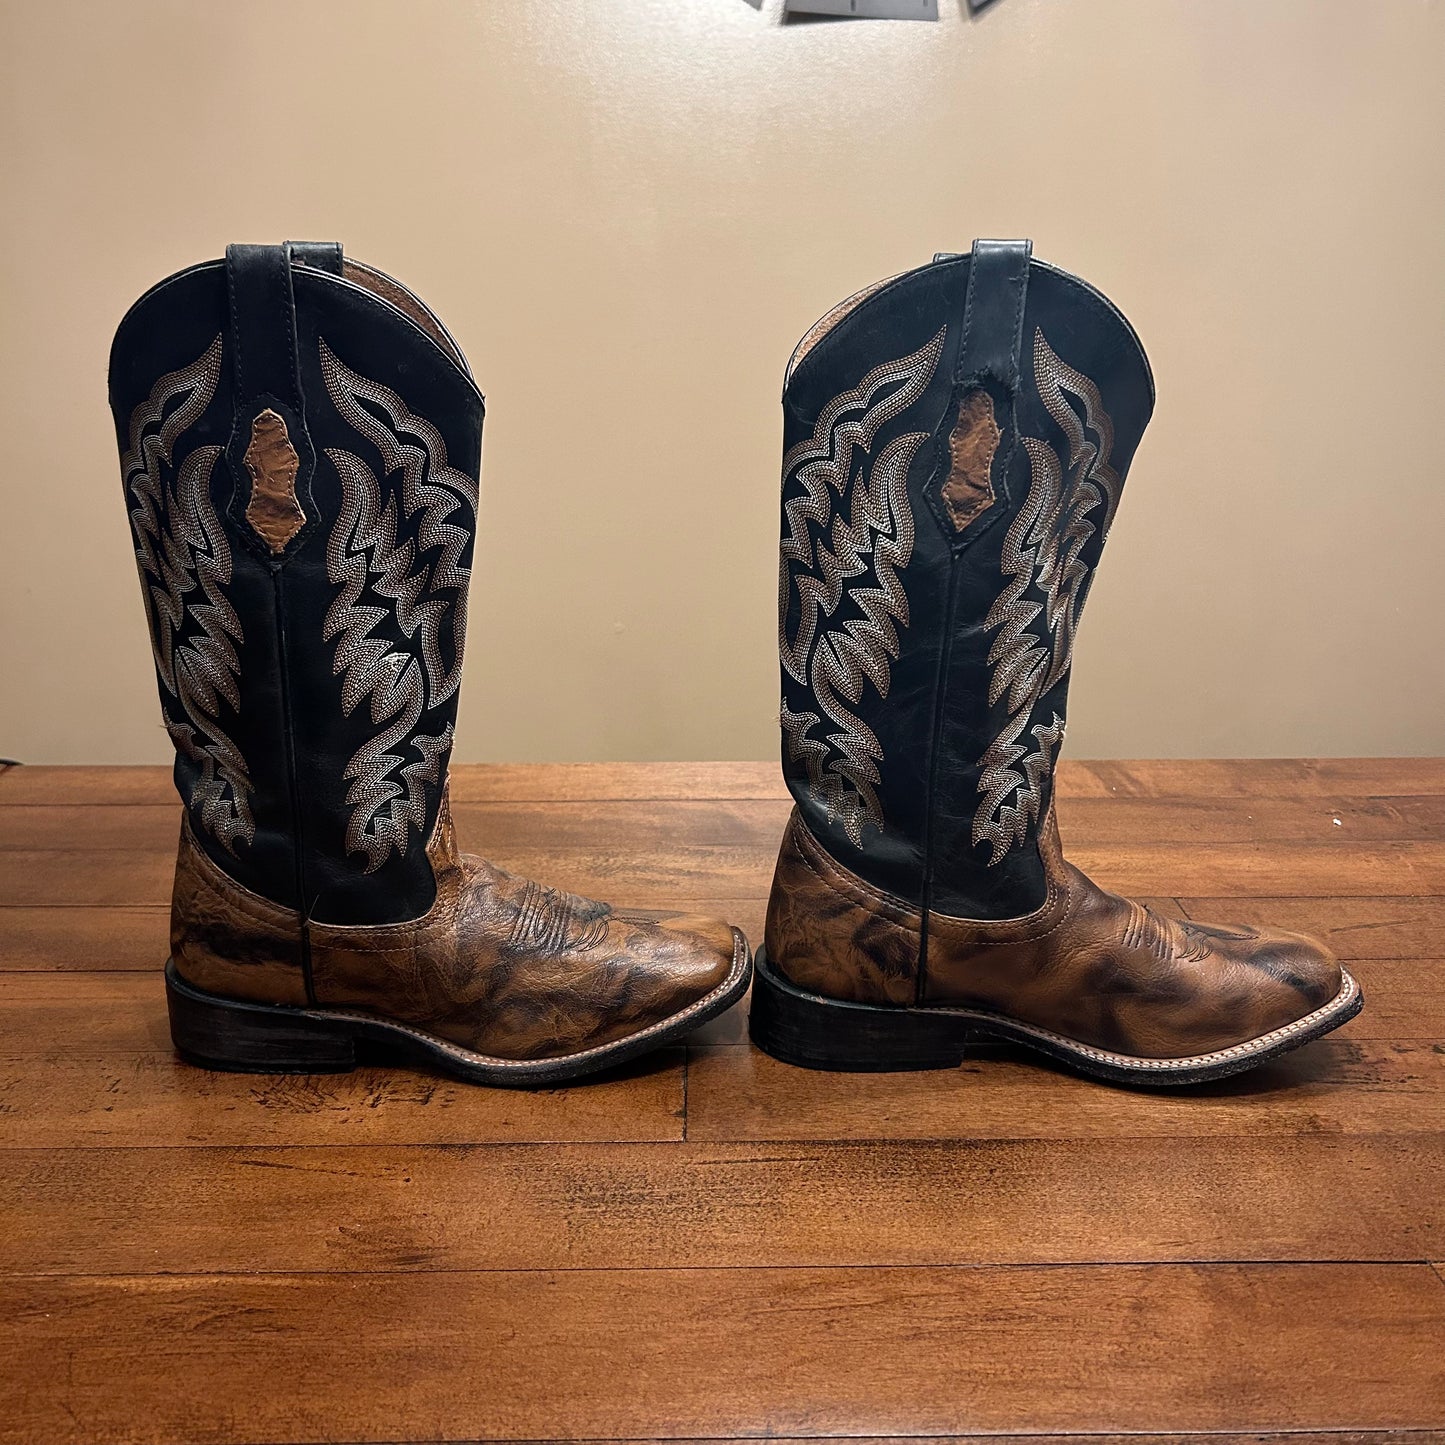 Gypsy Rose Square Toe Cowboy Boots Men’s Size 6.5 Women’s Size 8